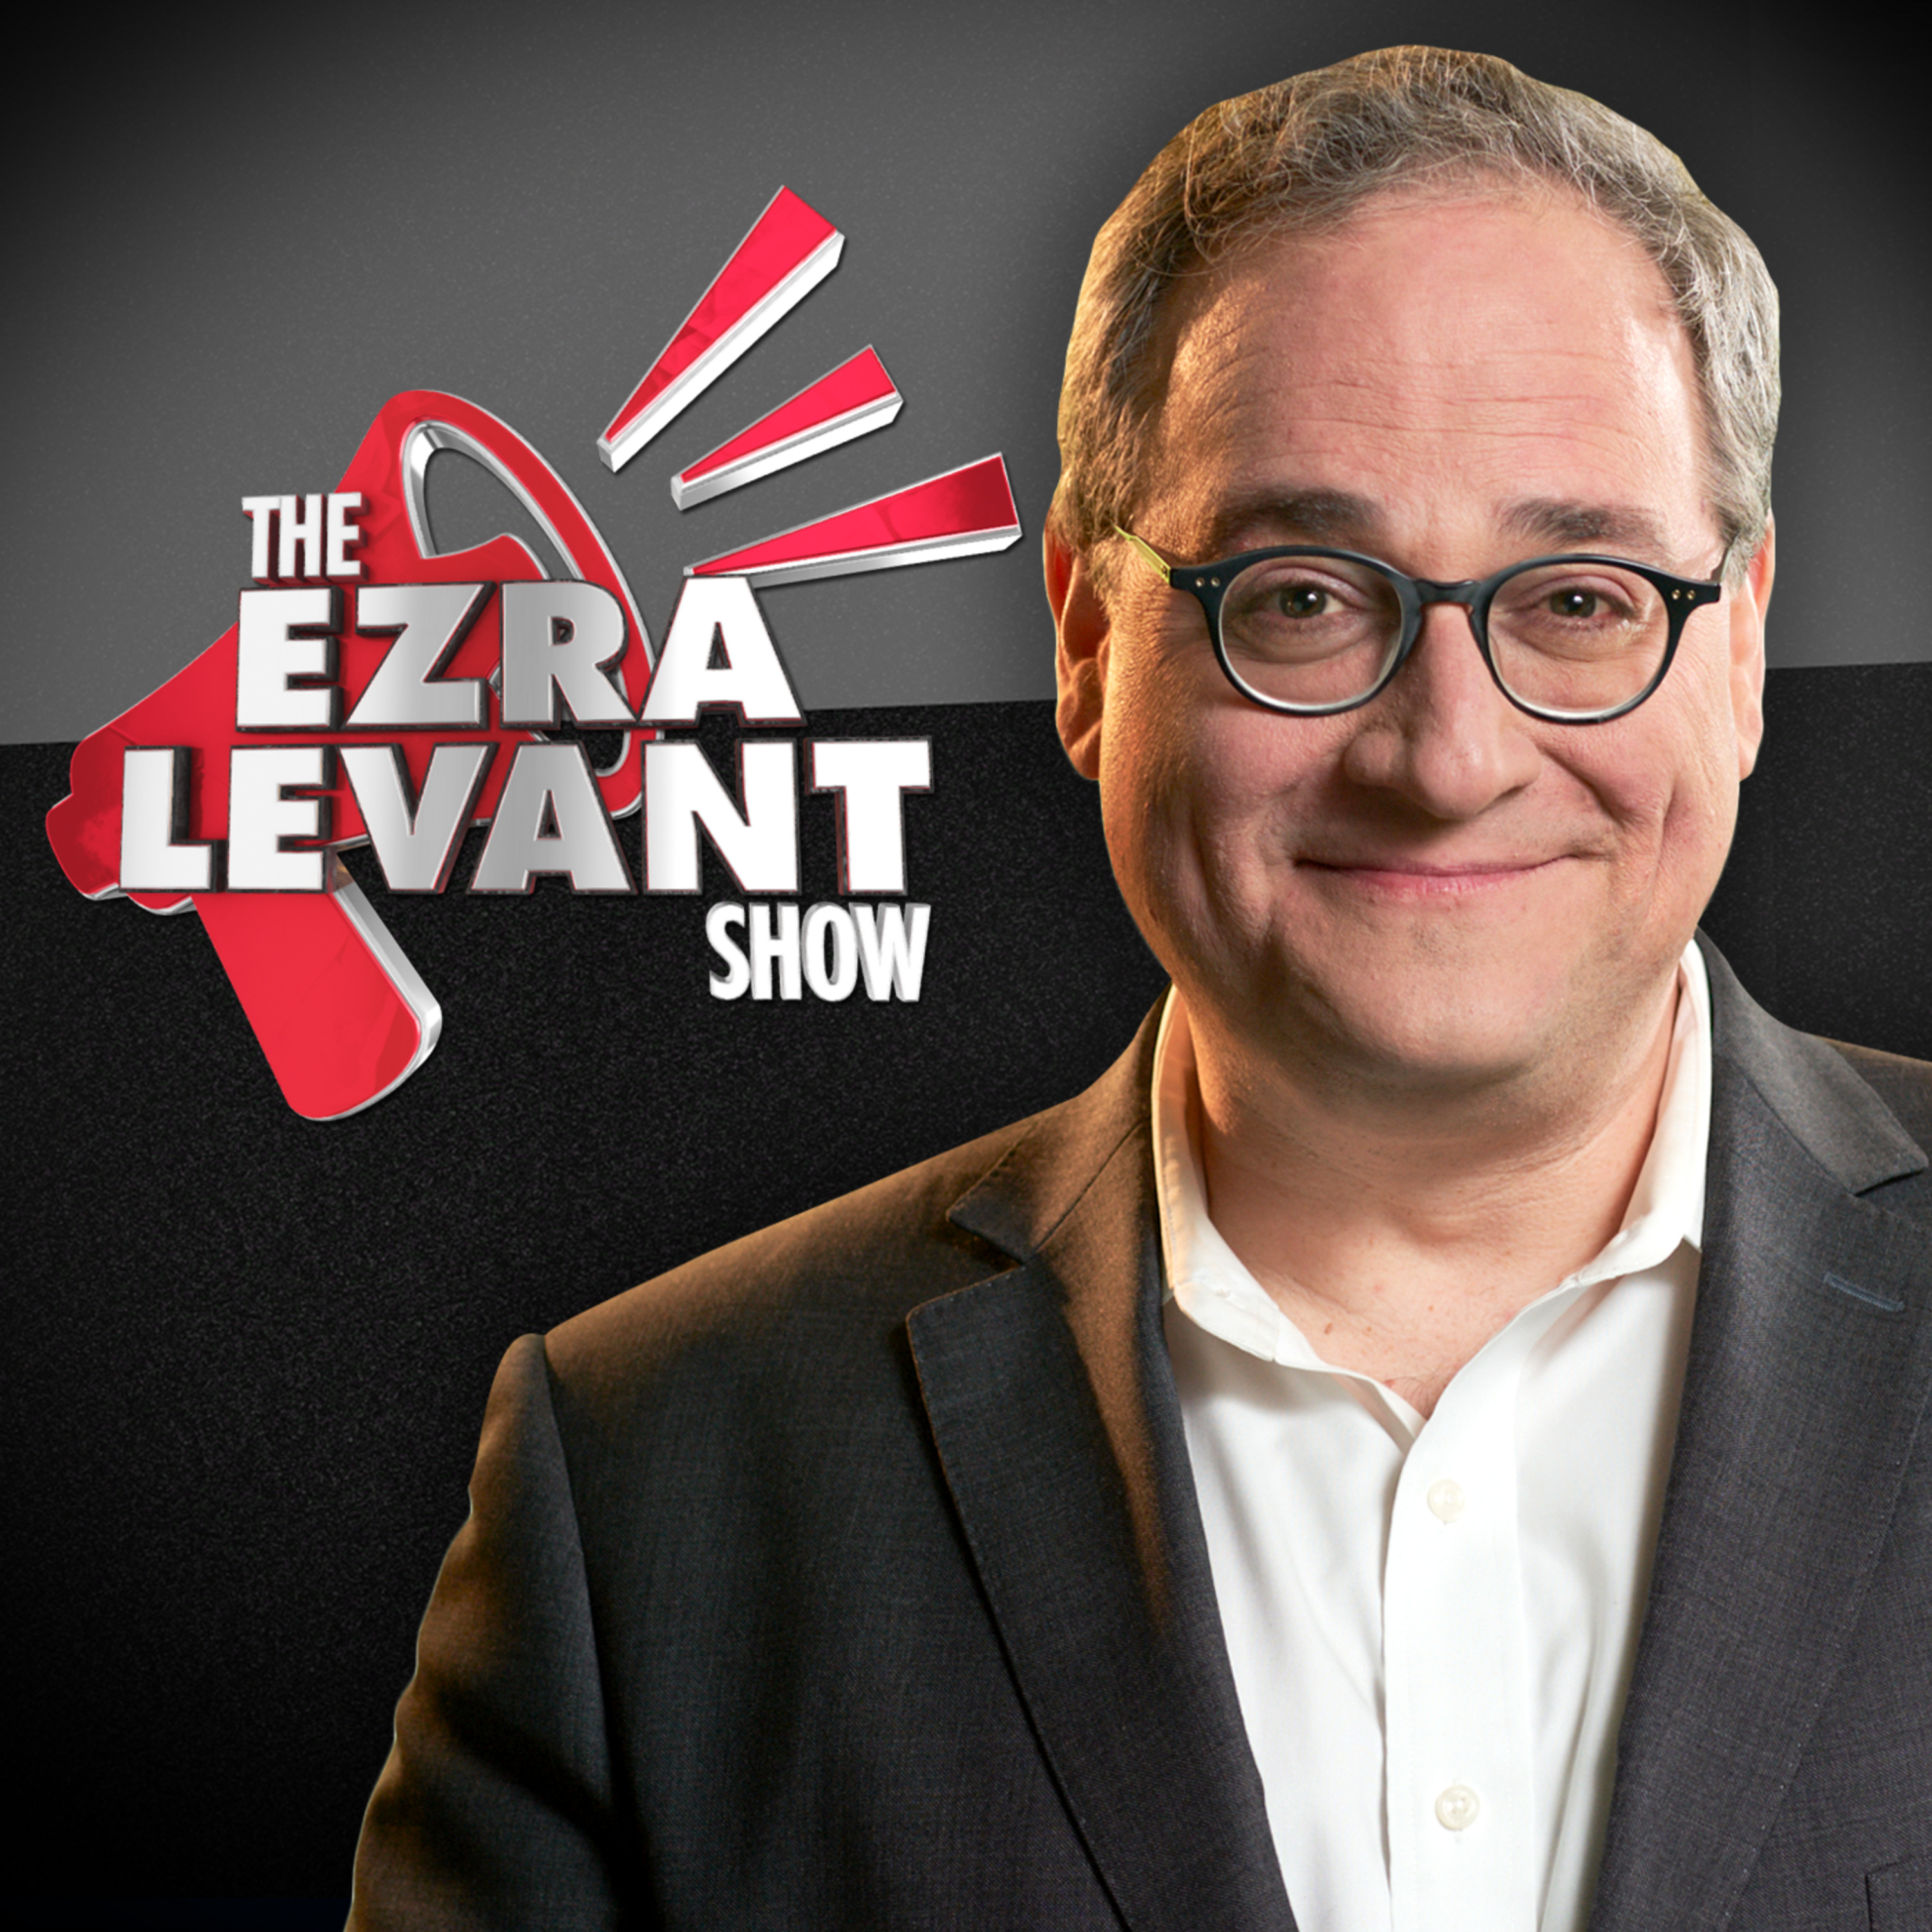 EZRA LEVANT | Jason Kenney squeaks through a leadership review, but announces he’s resigning